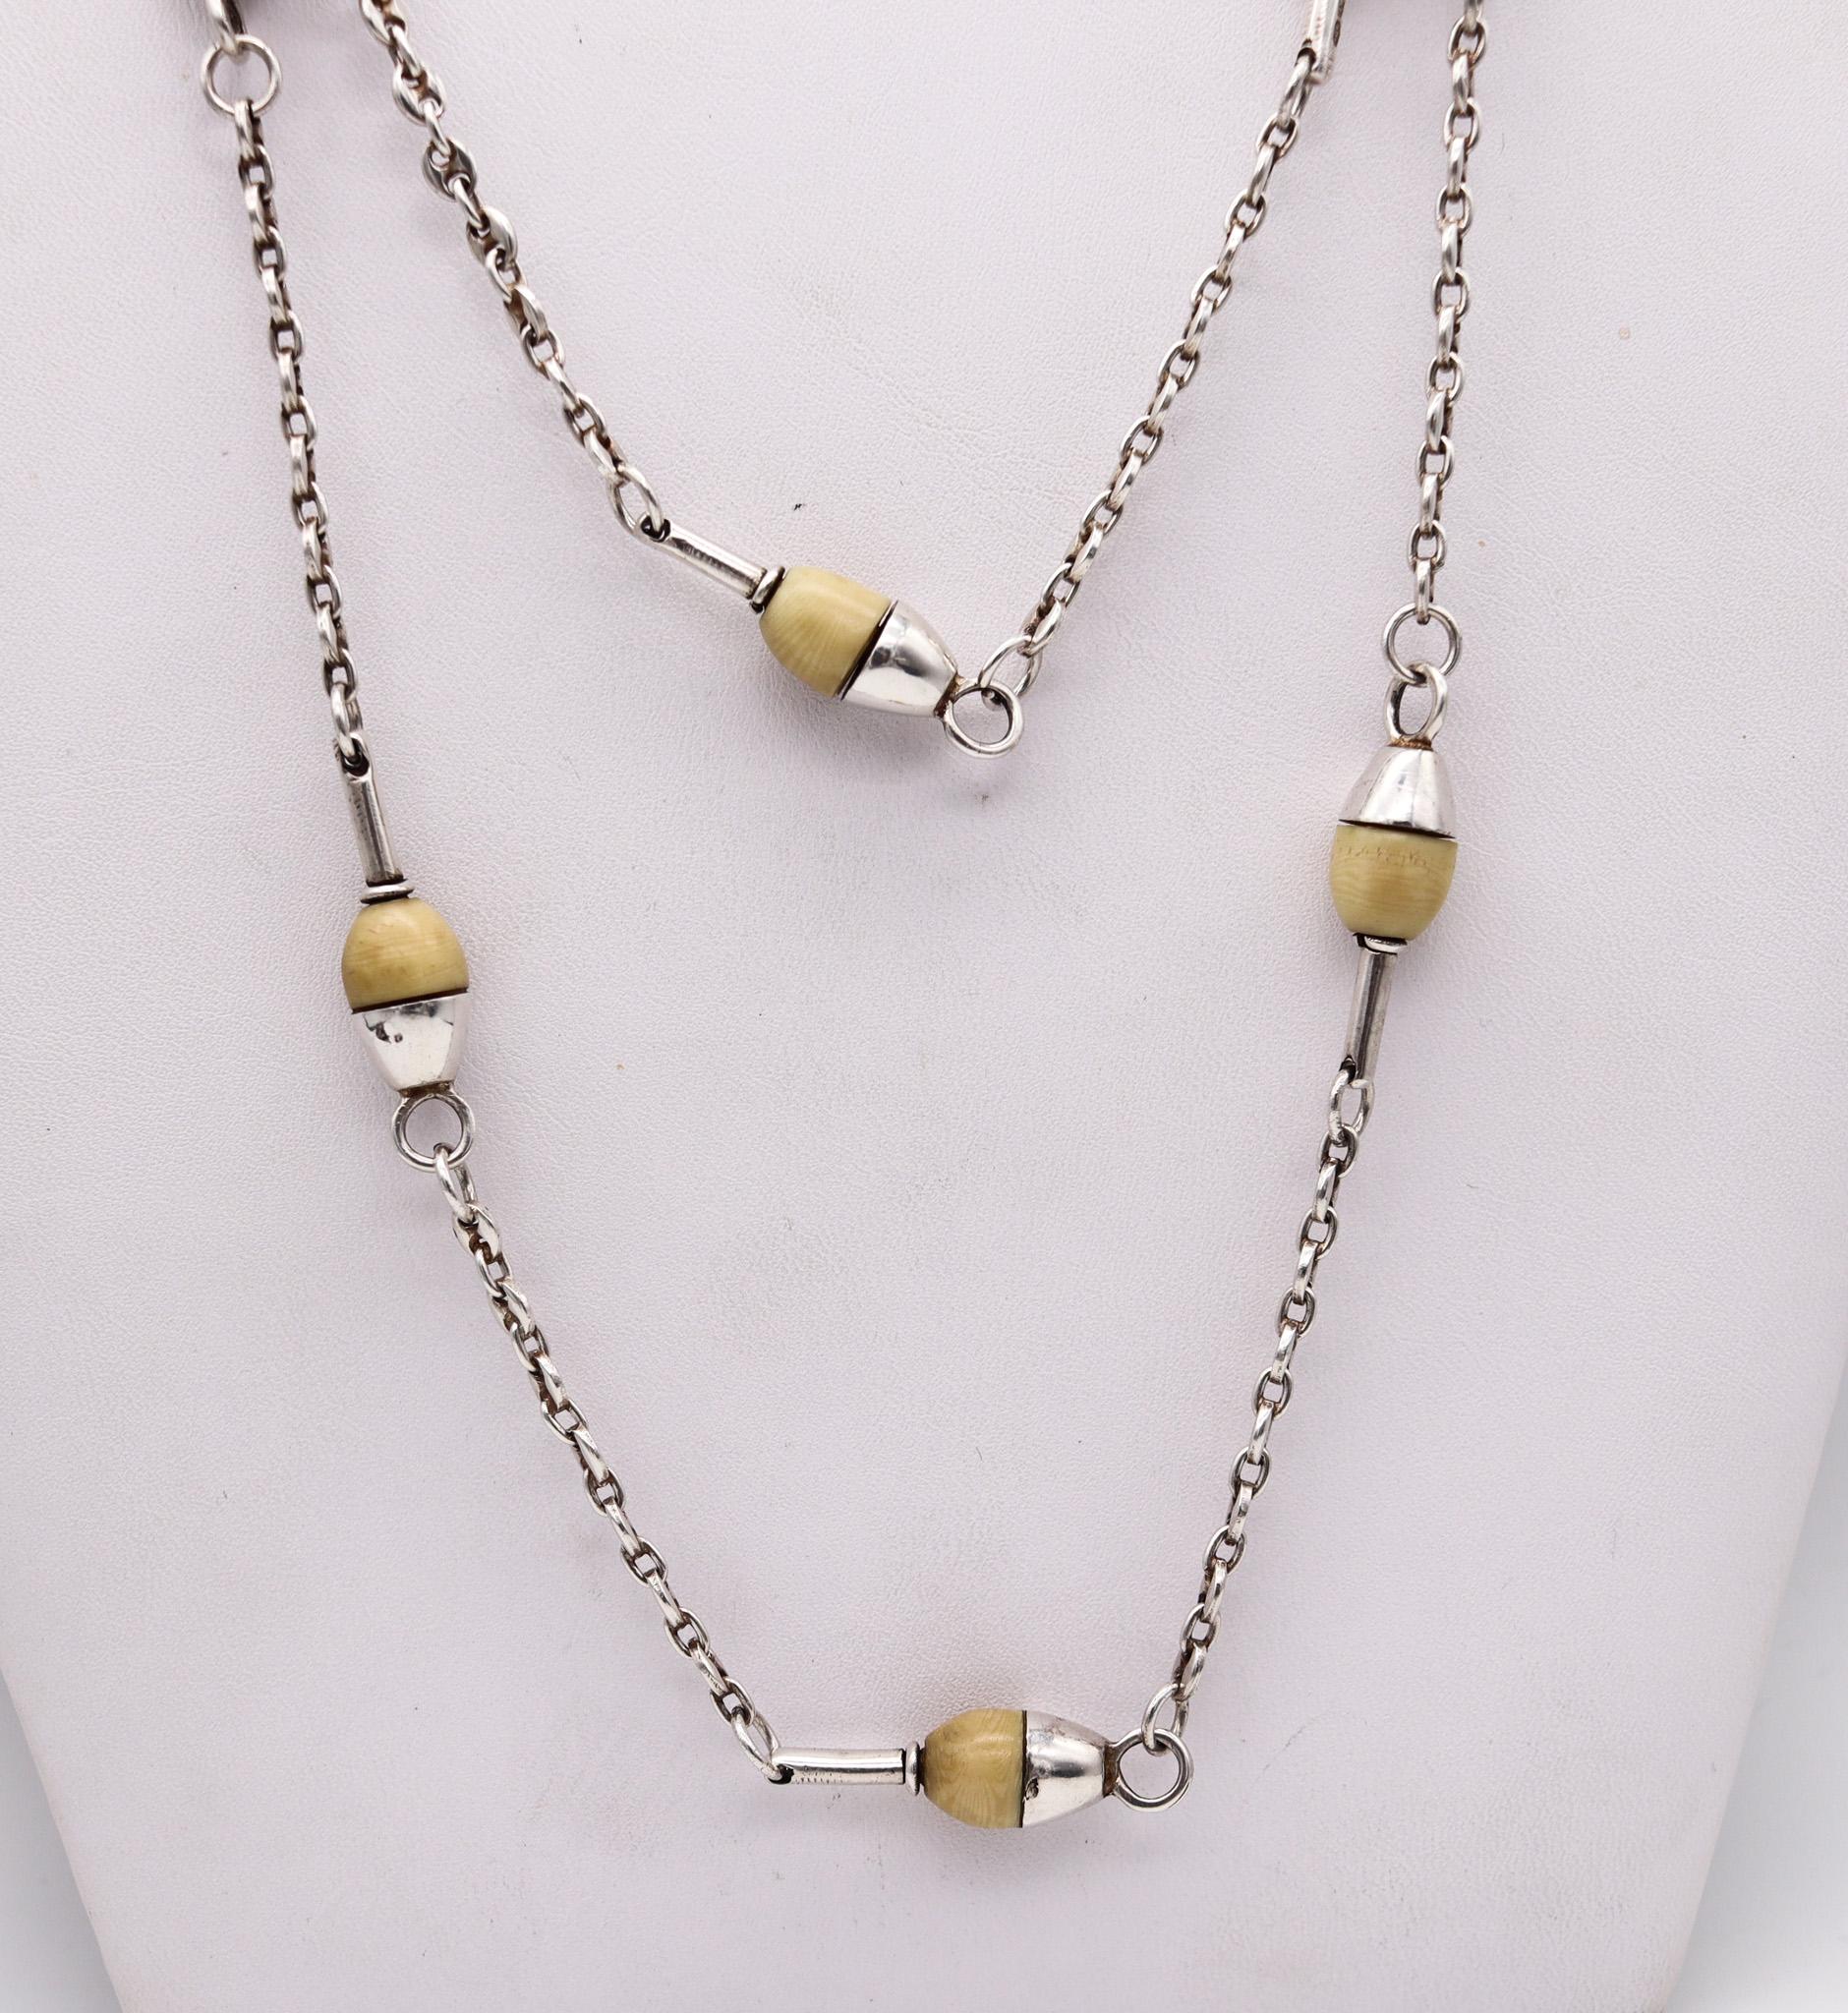 Cabochon Arezzo 1960 Italian Modernist Long Sautoir Necklace In .925 Sterling Silver For Sale